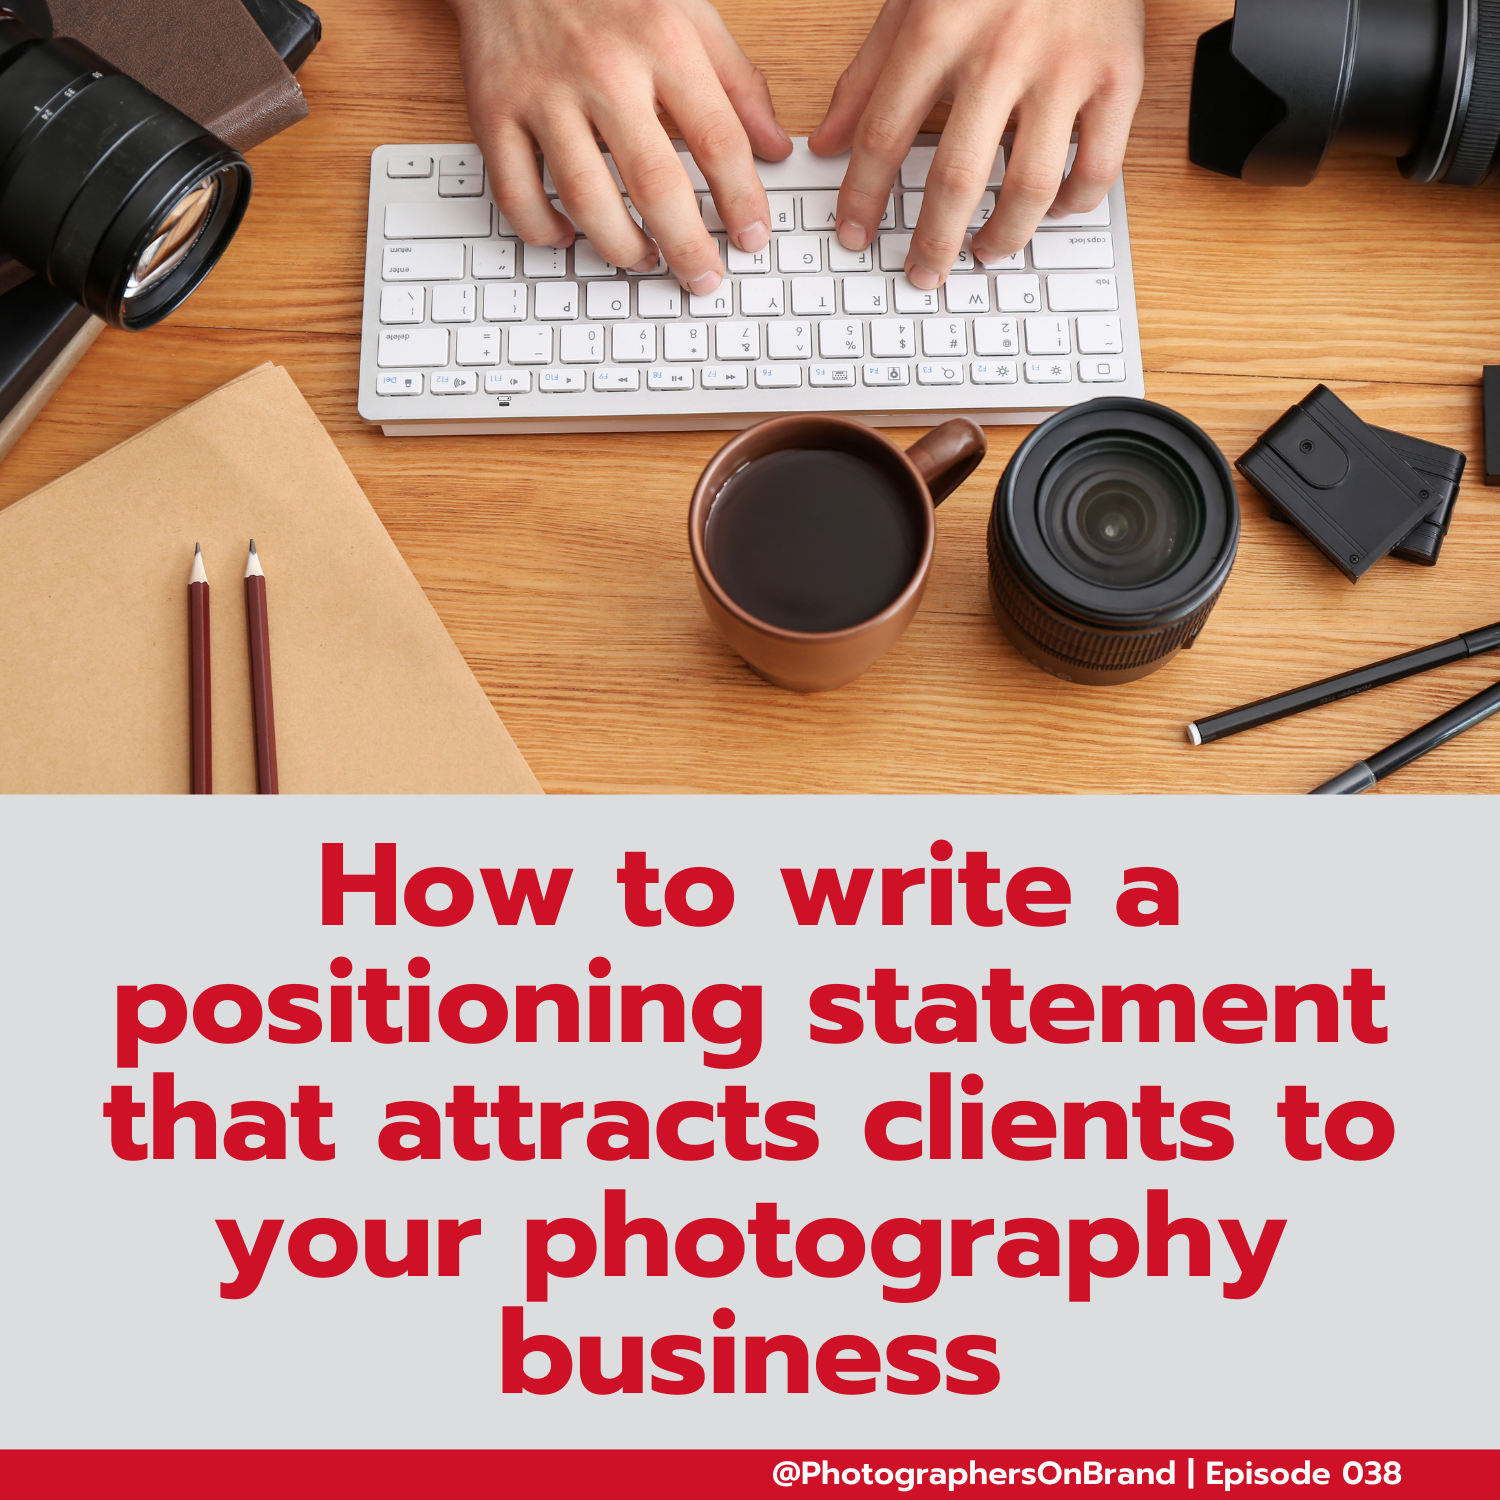 20 - How to write a positioning statement that attracts clients